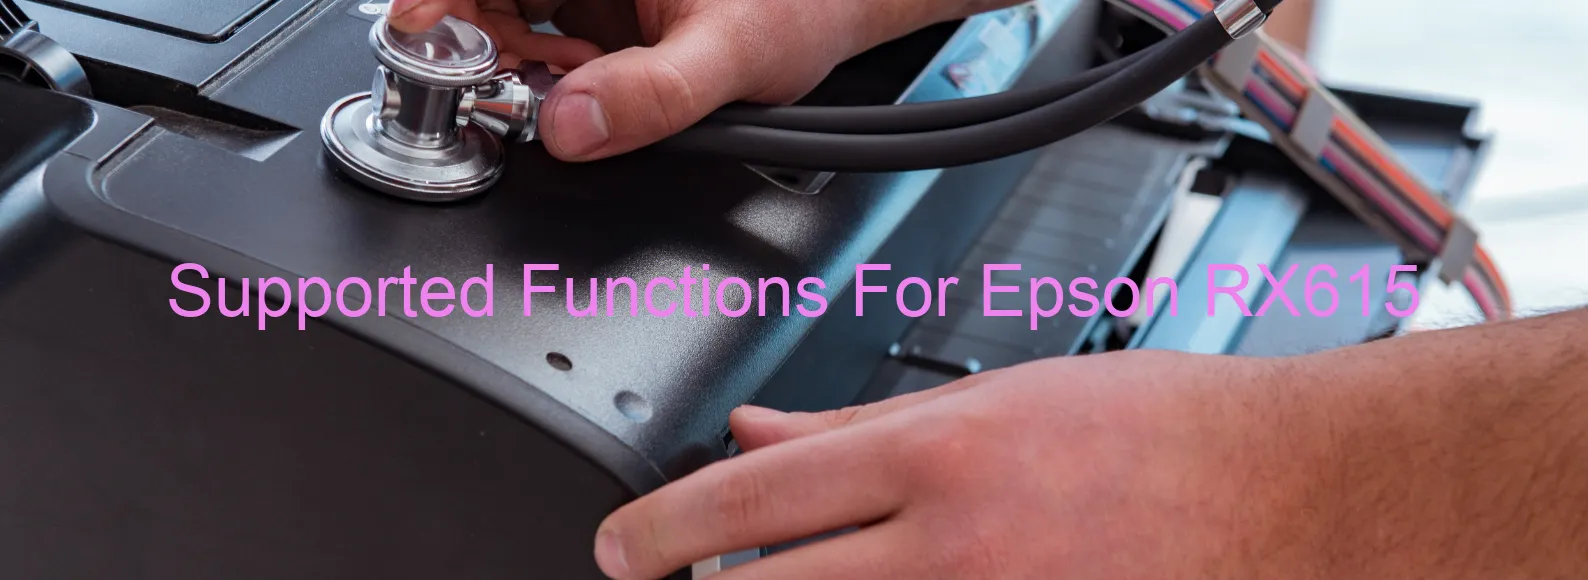 supported-functions-for-epson-rx615.webp